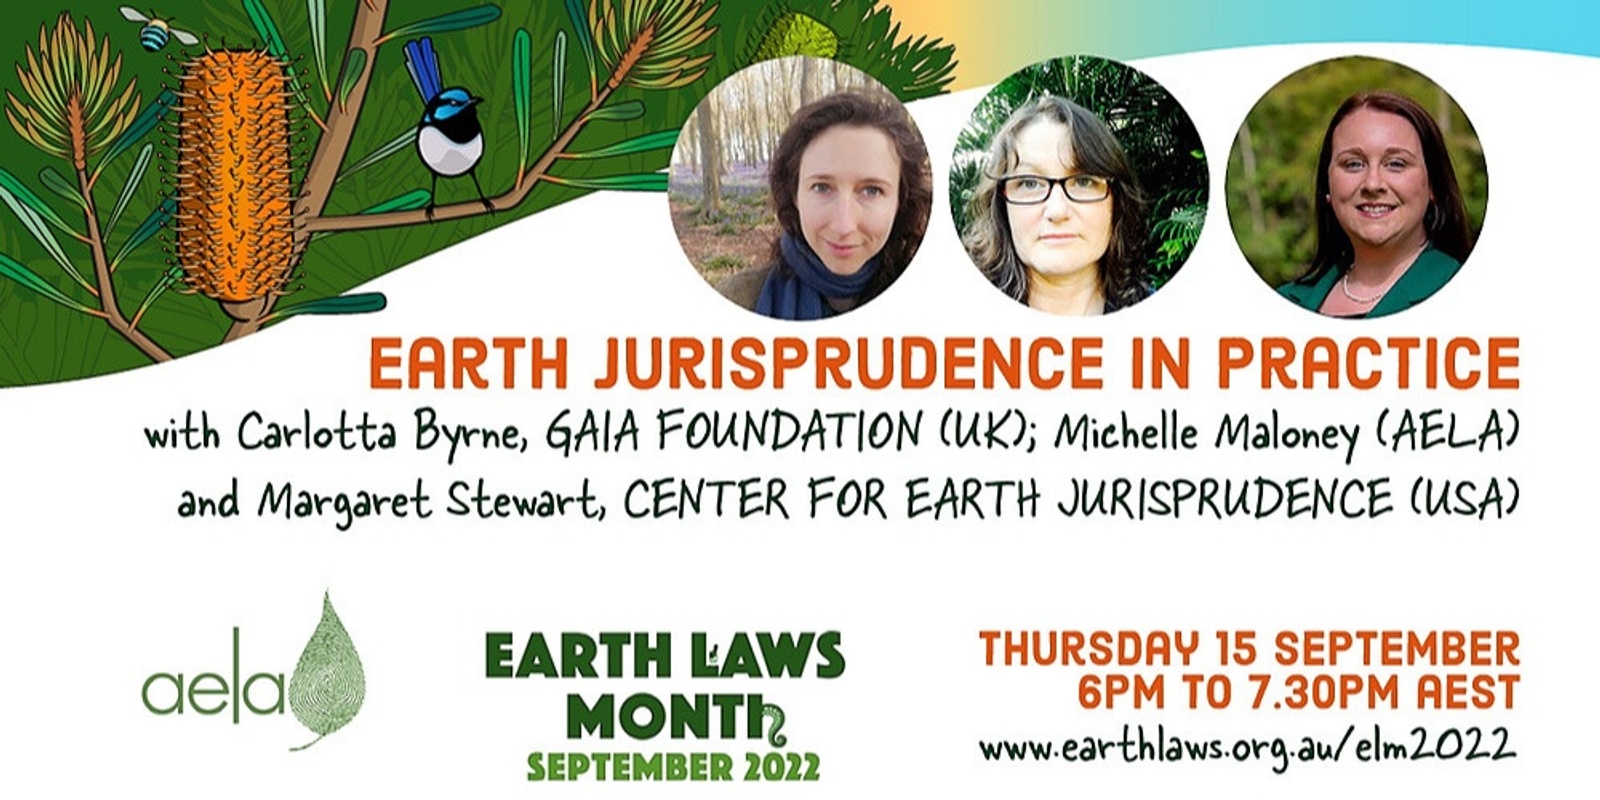 Banner image for Earth Jurisprudence in Practice, with Carlotta Byrne, Michelle Maloney and Margaret Stewart